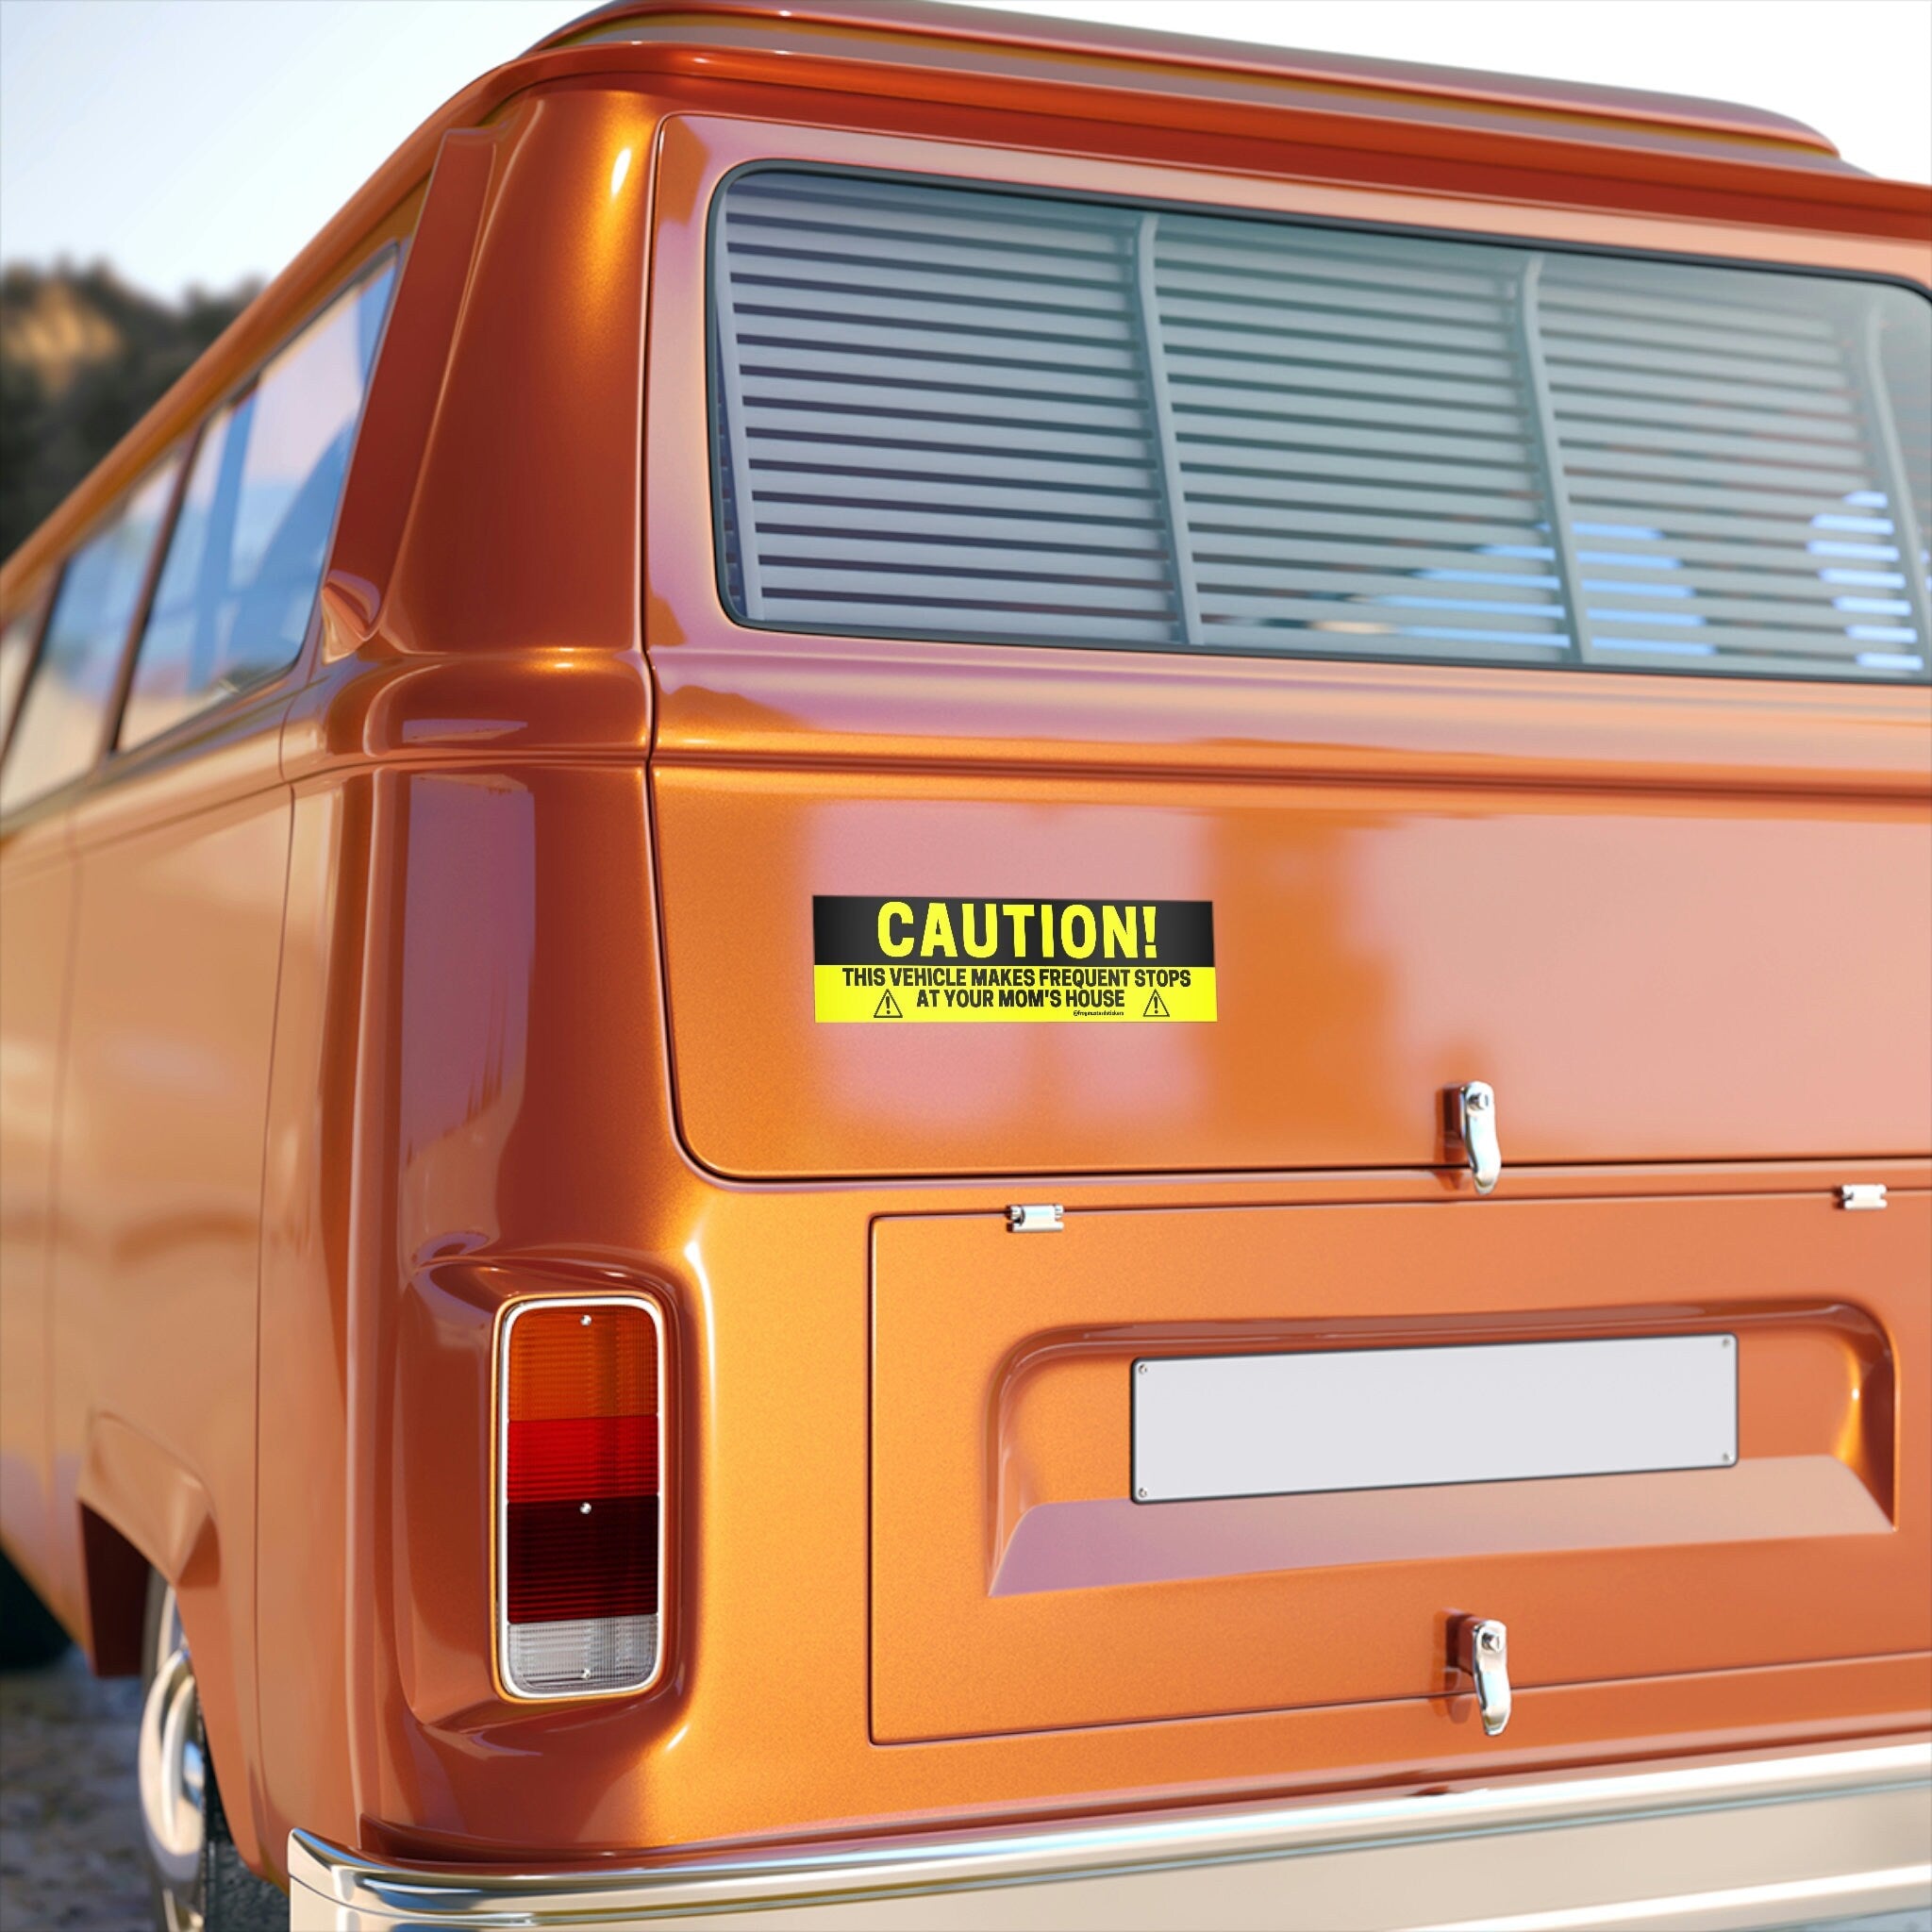 CAUTION! This vehicle makes frequent stops at your mom's house Bumper Sticker or Magnet | 8.5" x 2.5" | Bumper Sticker OR Magnet